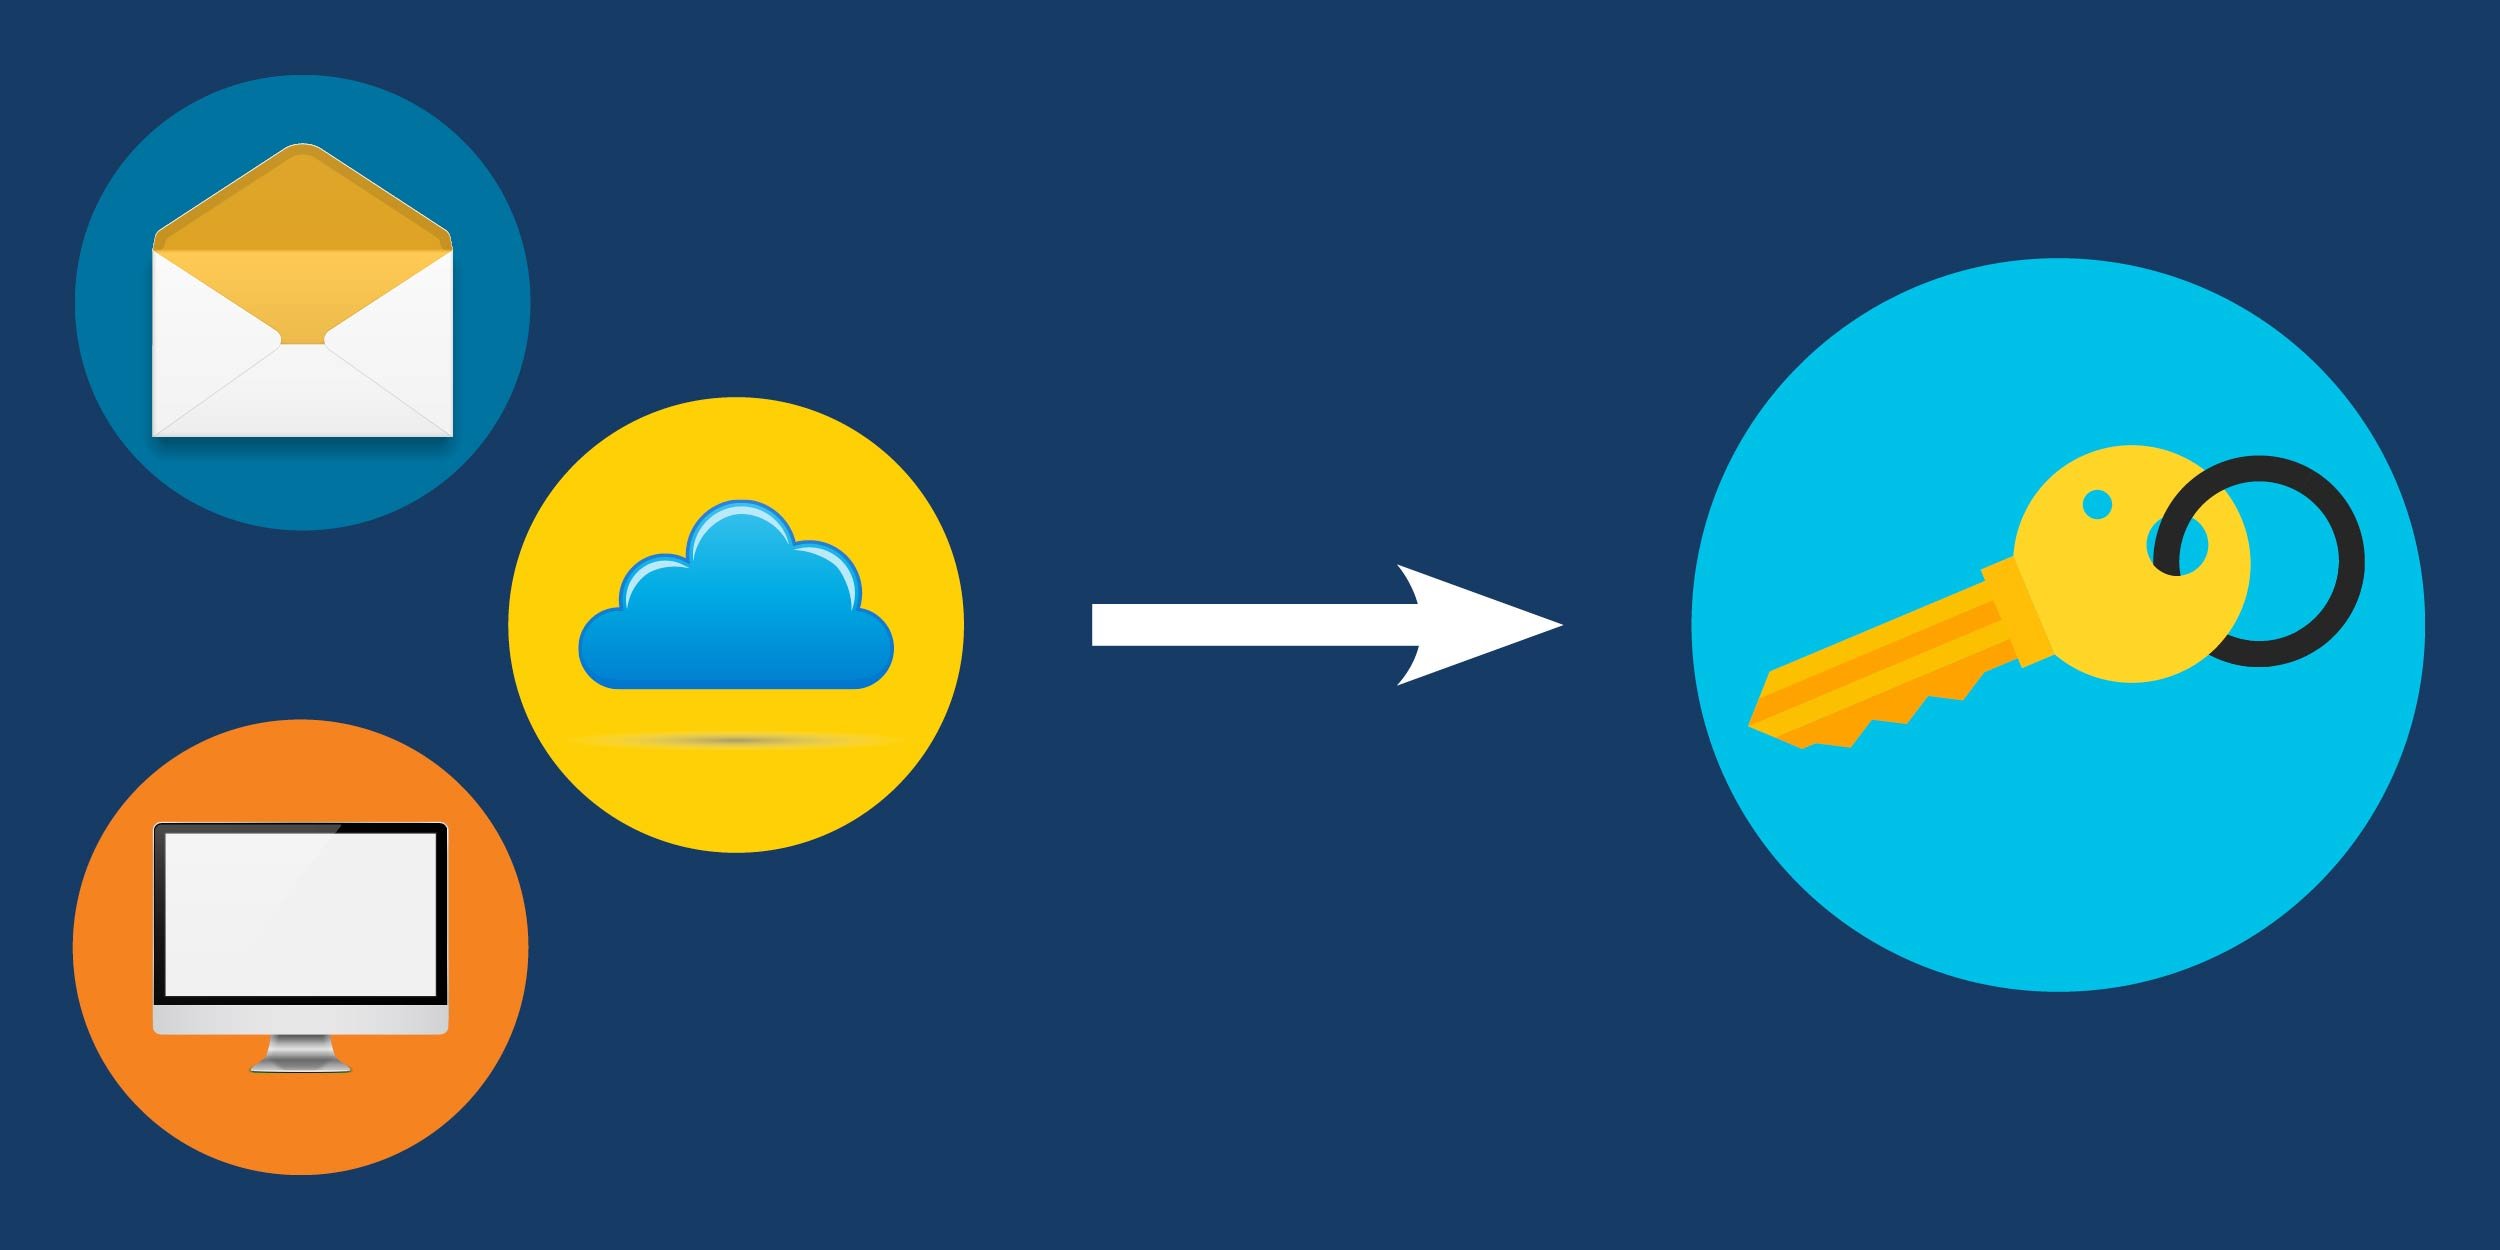 illustration showing an open envelope, a computer monitor, and a cloud pointing at a key symbolizing identity management through Okta for Good